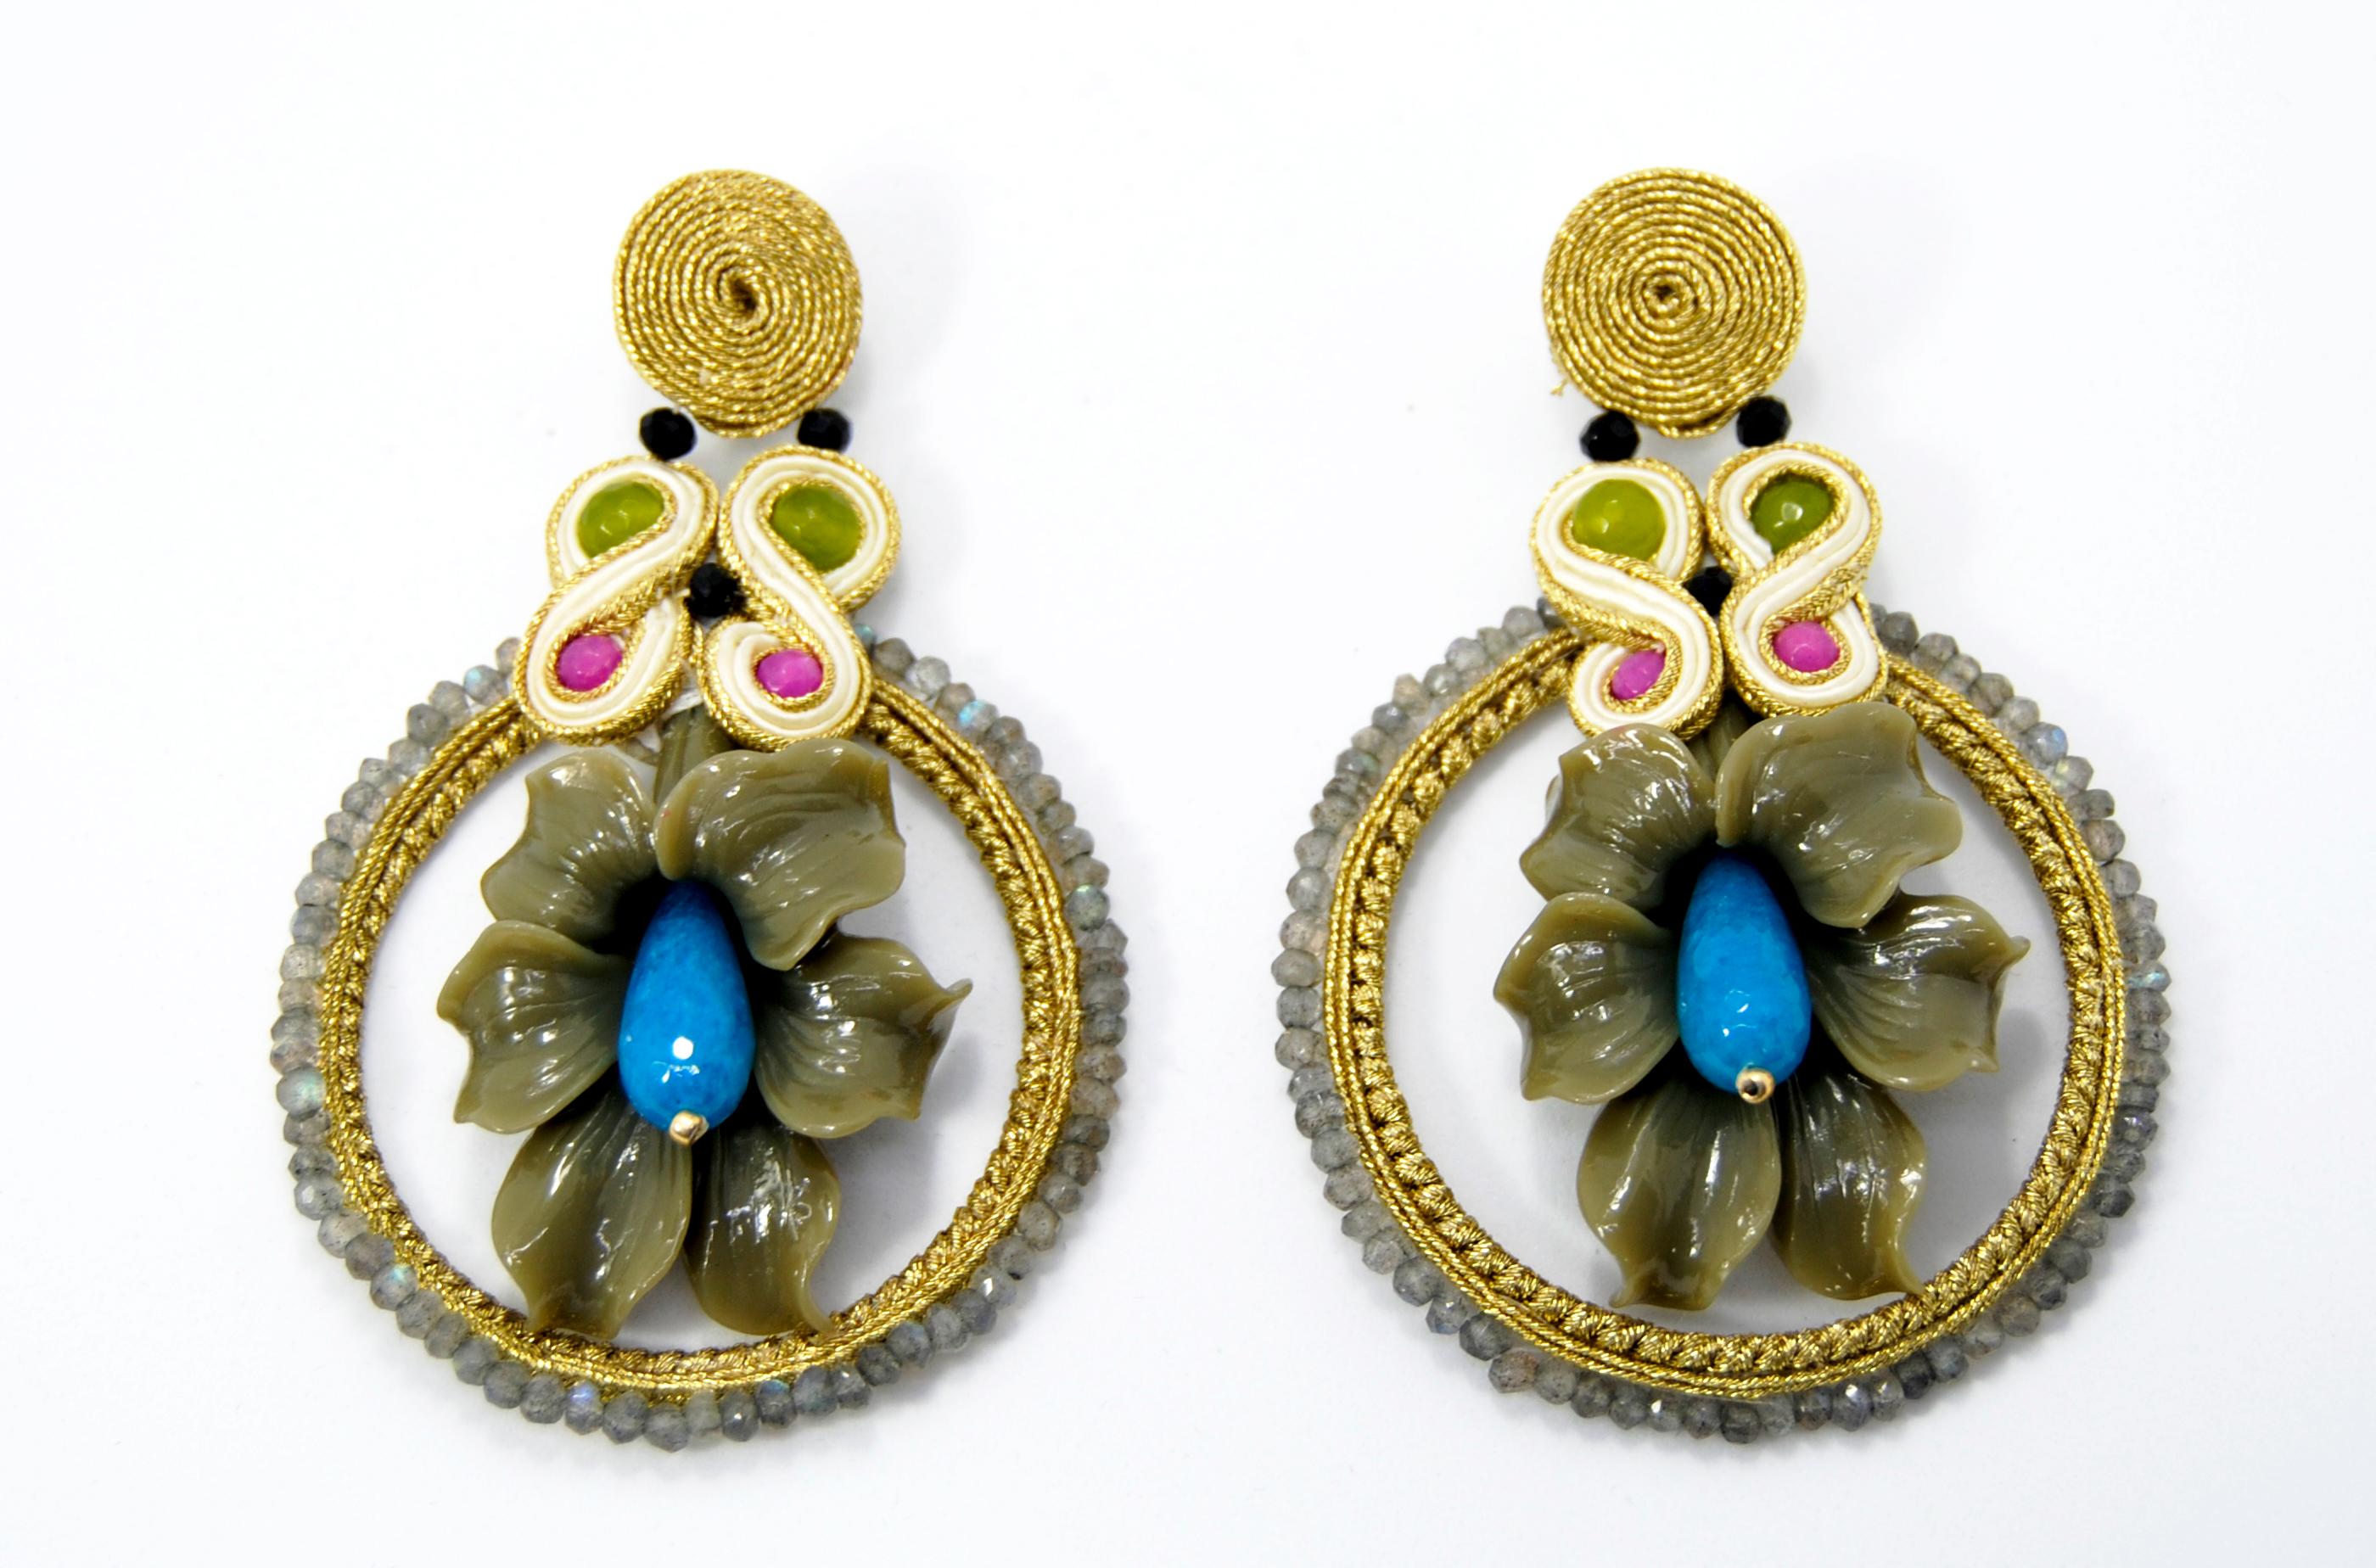 Soutache Technique earrings a Joint venture of Joyería Pradera and Musula Jewels where they create Colorful, Lively and Light Travel Jewelry that has an Iconic touch and give a modern and stylish look.
Blue Jade, Resin and Morganite beads with